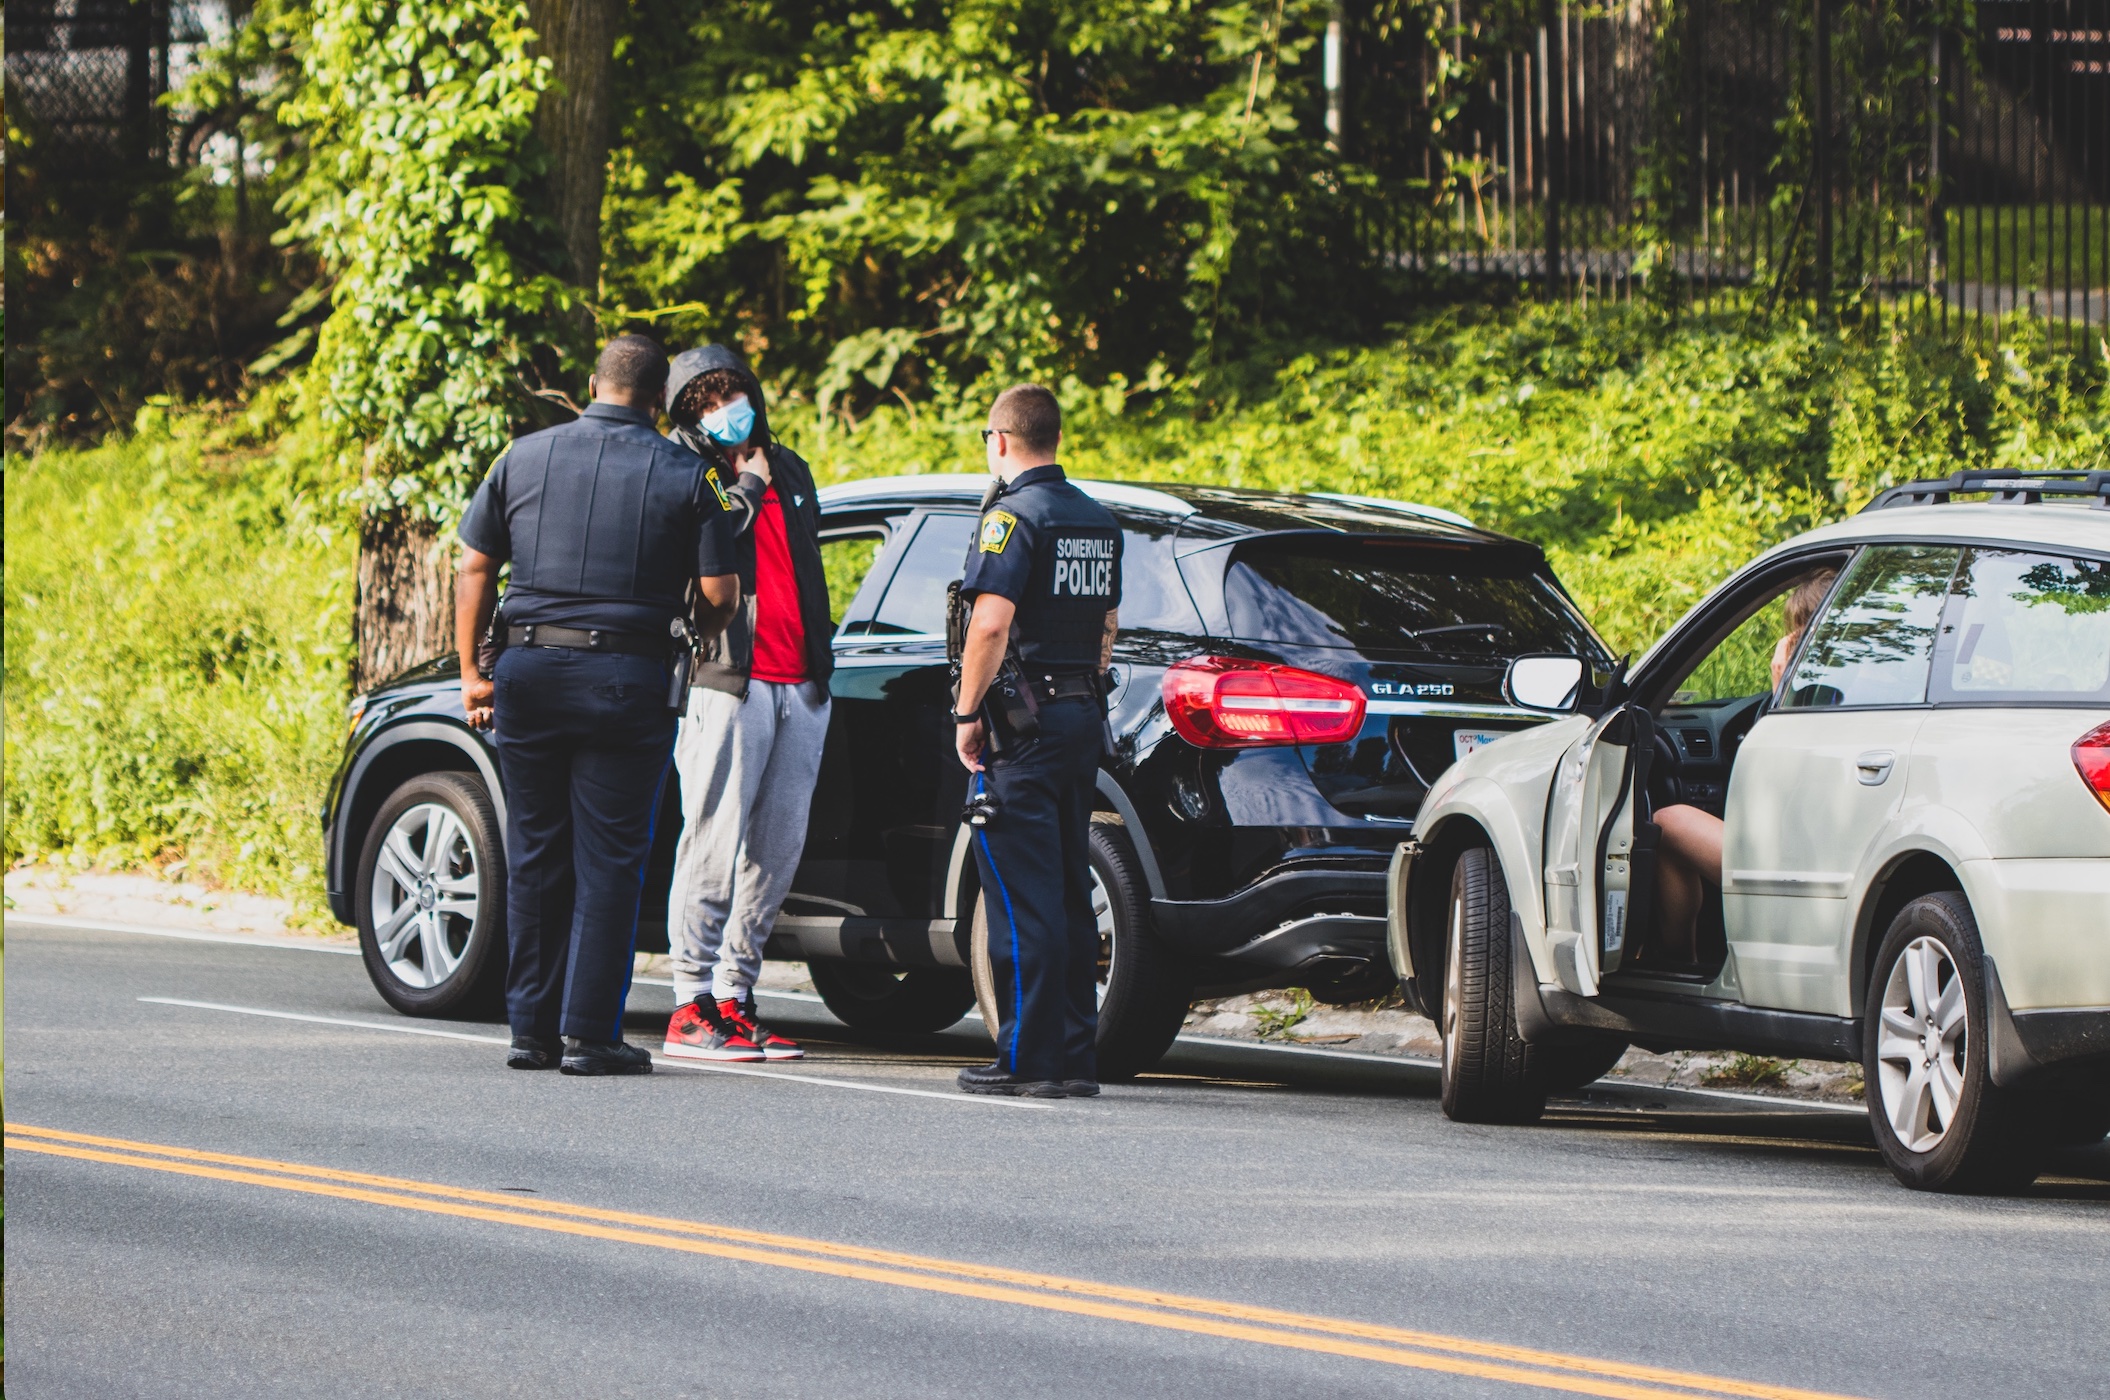 Minor car accident, police on the scene; image by Aaron Doucett, via Unsplash.com.